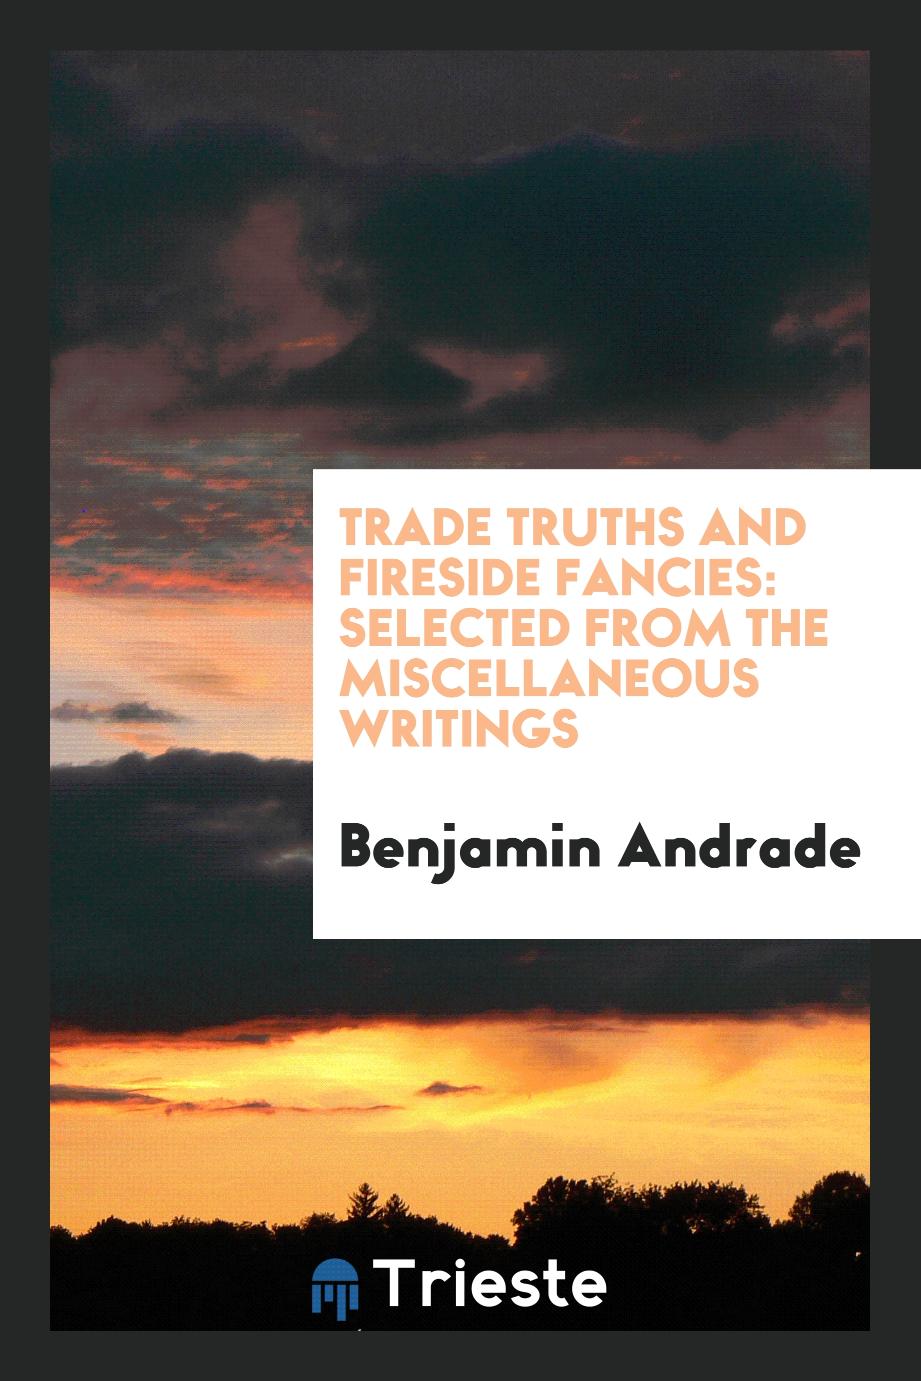 Trade Truths and Fireside Fancies: Selected from the Miscellaneous Writings